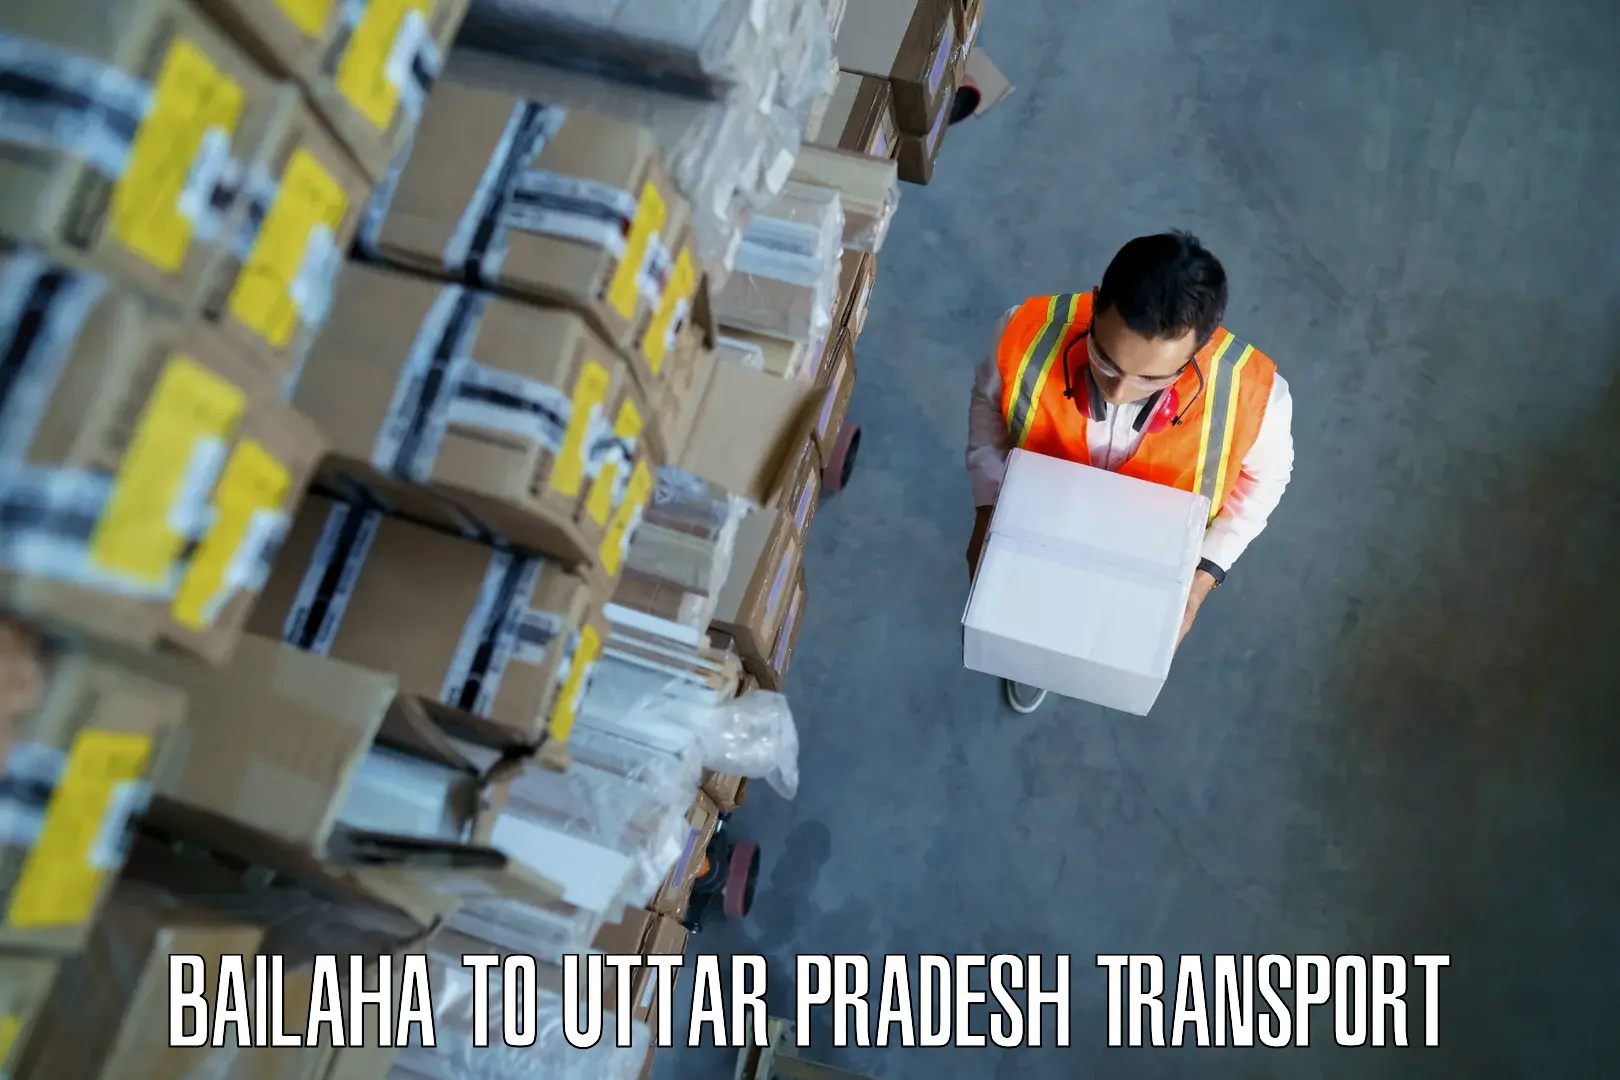 Material transport services Bailaha to Fatehabad Agra